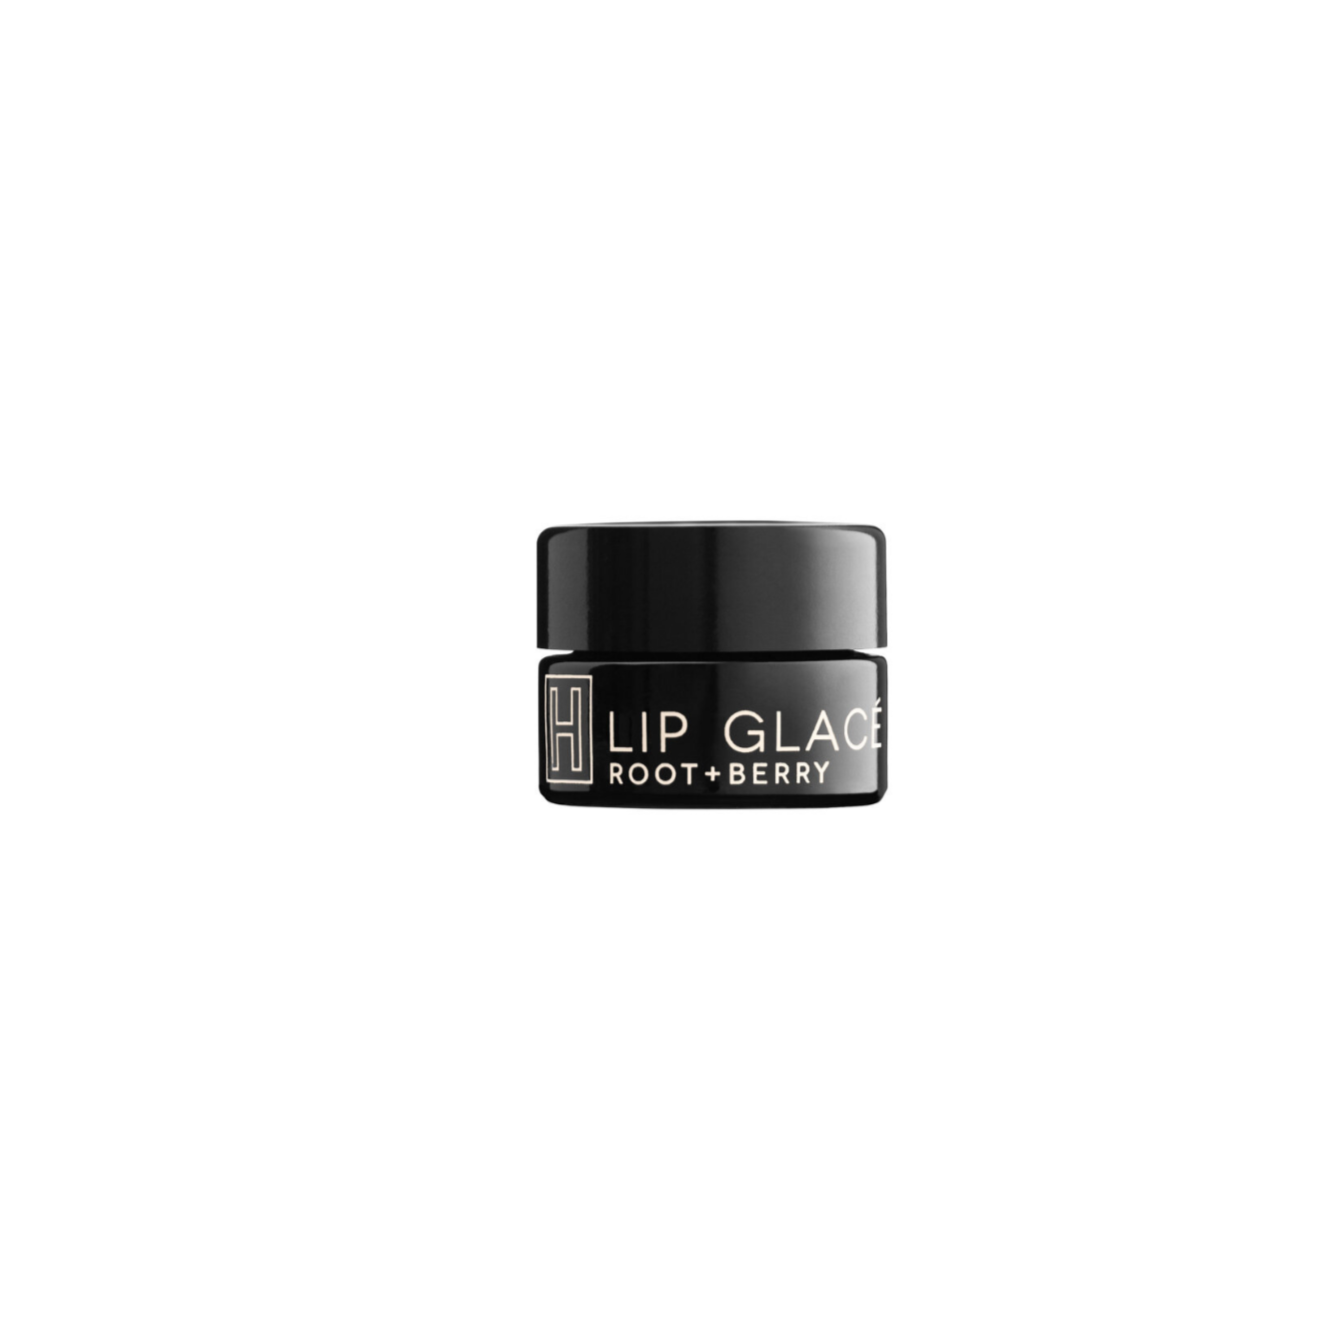 H is for Love Lip Glace lip butter 